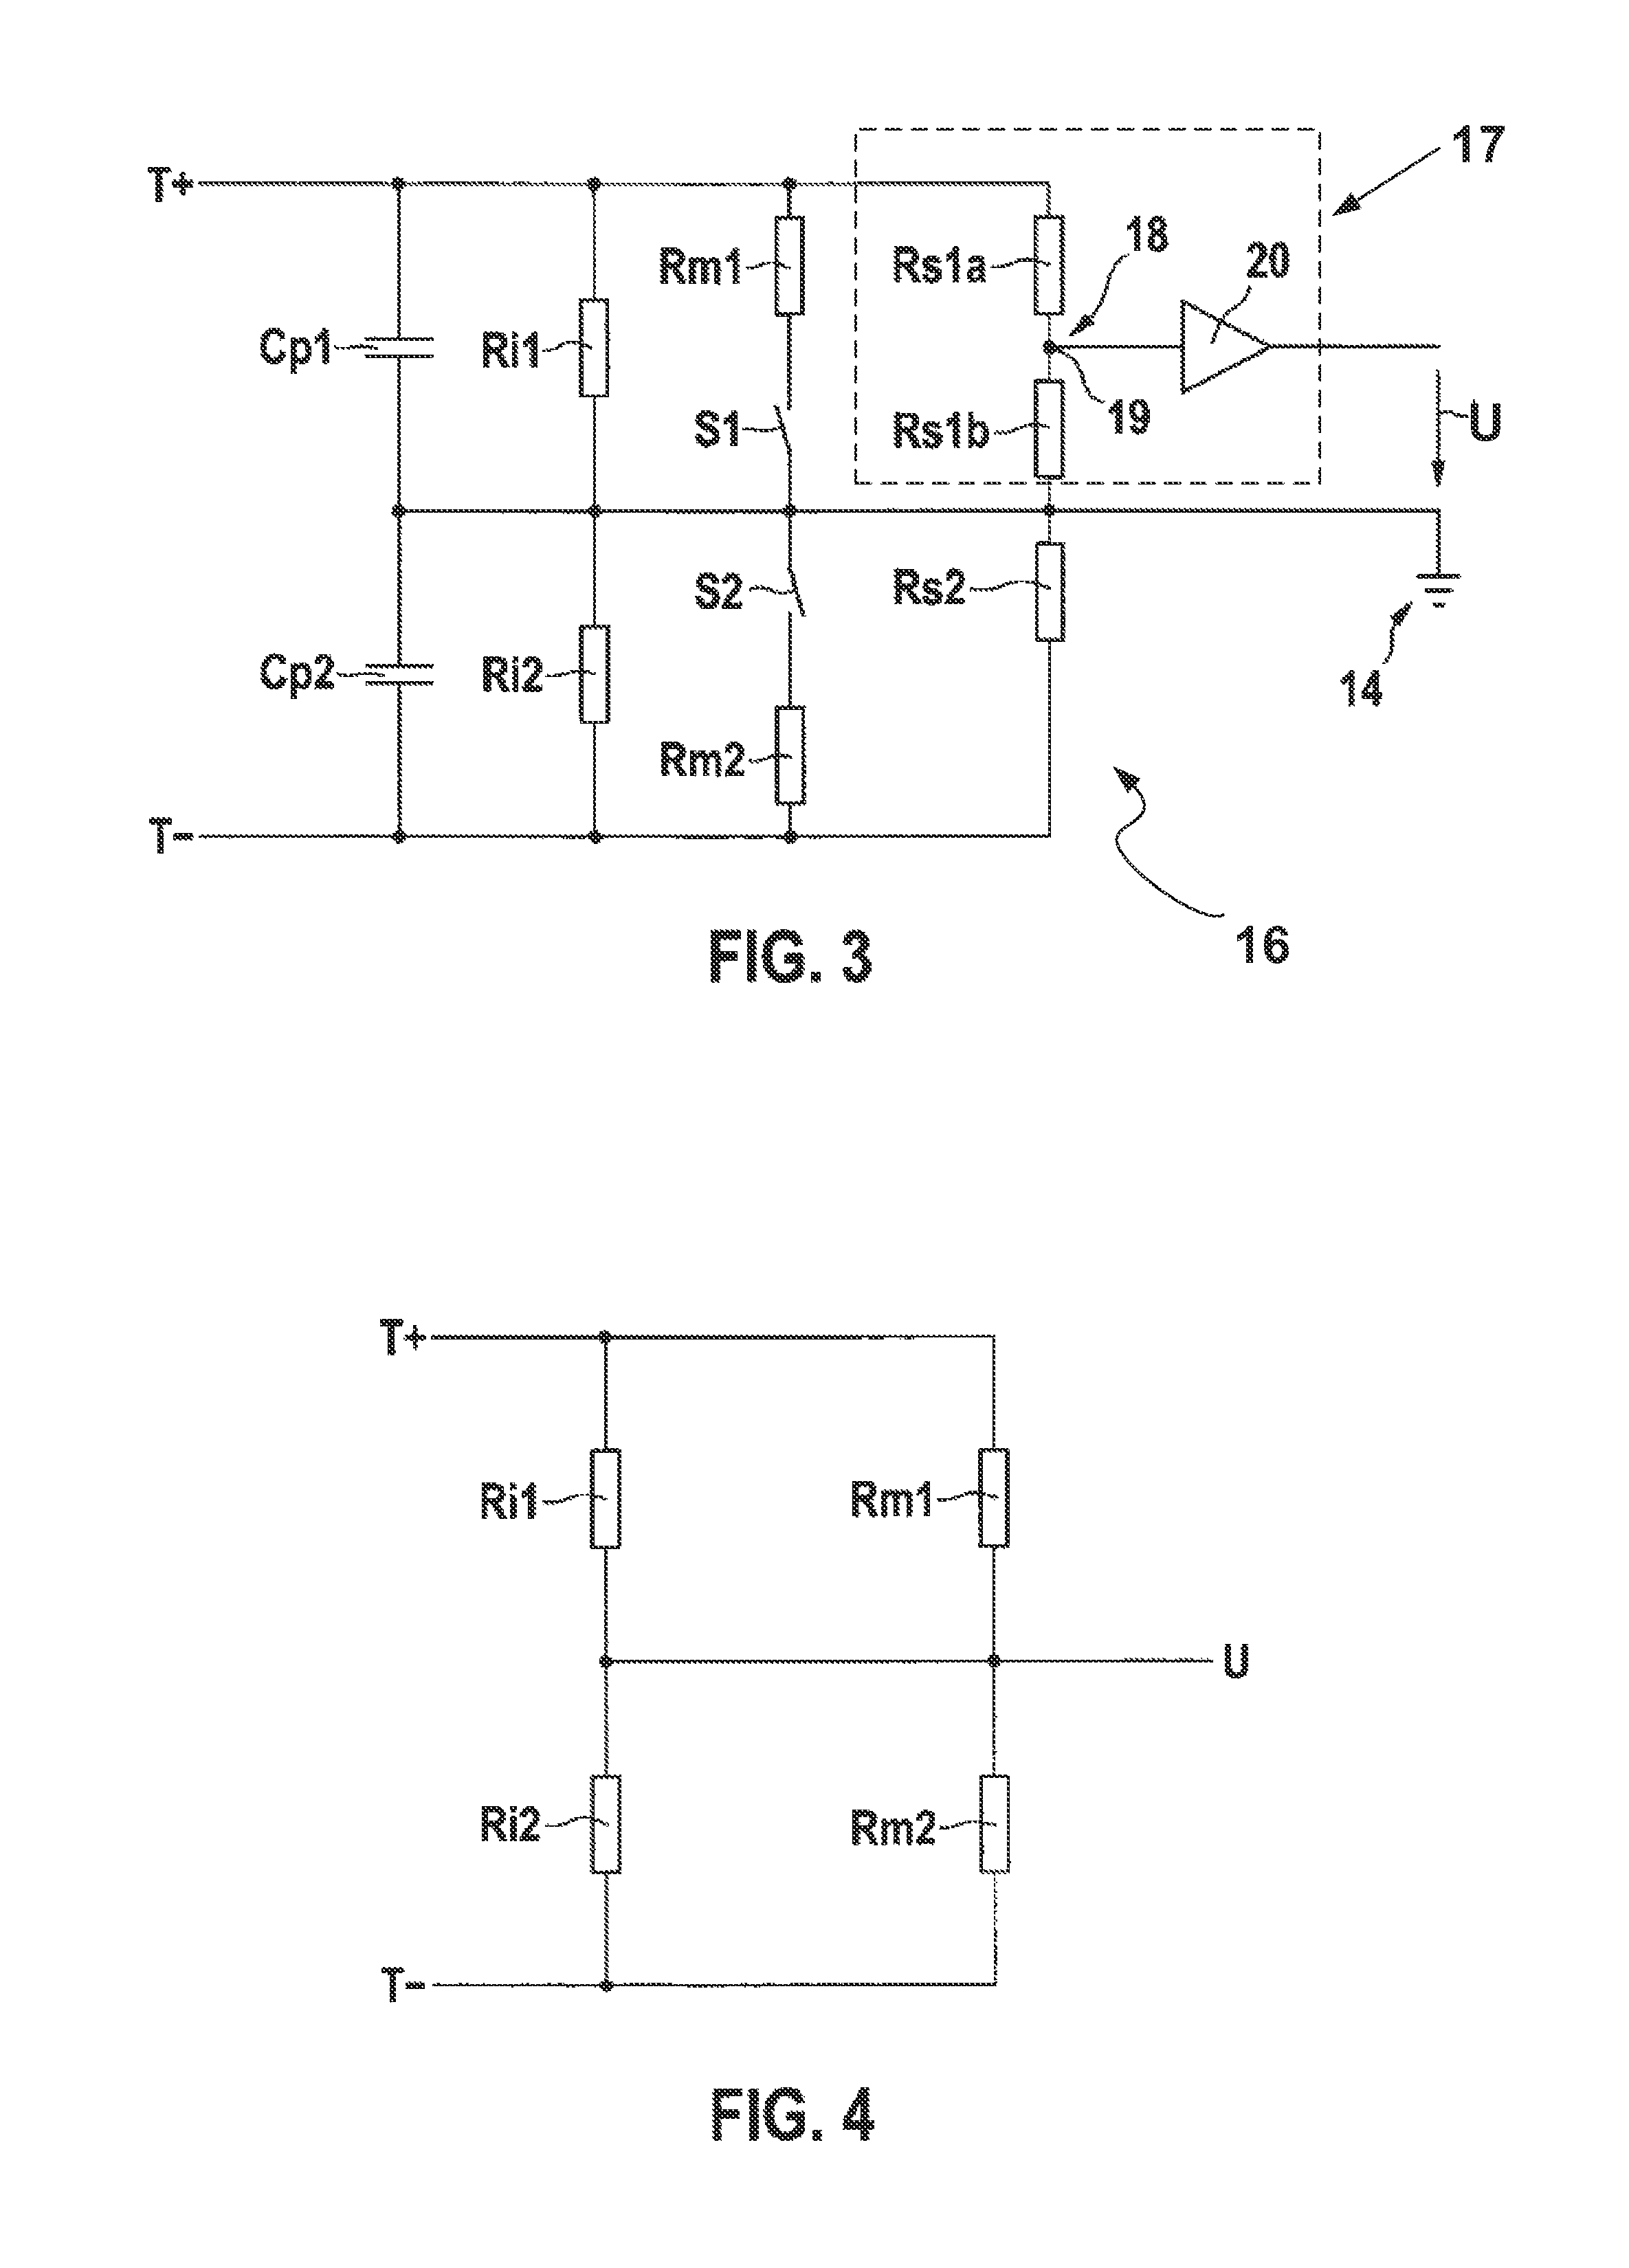 Circuit arrangement and method for monitoring electrical isolation